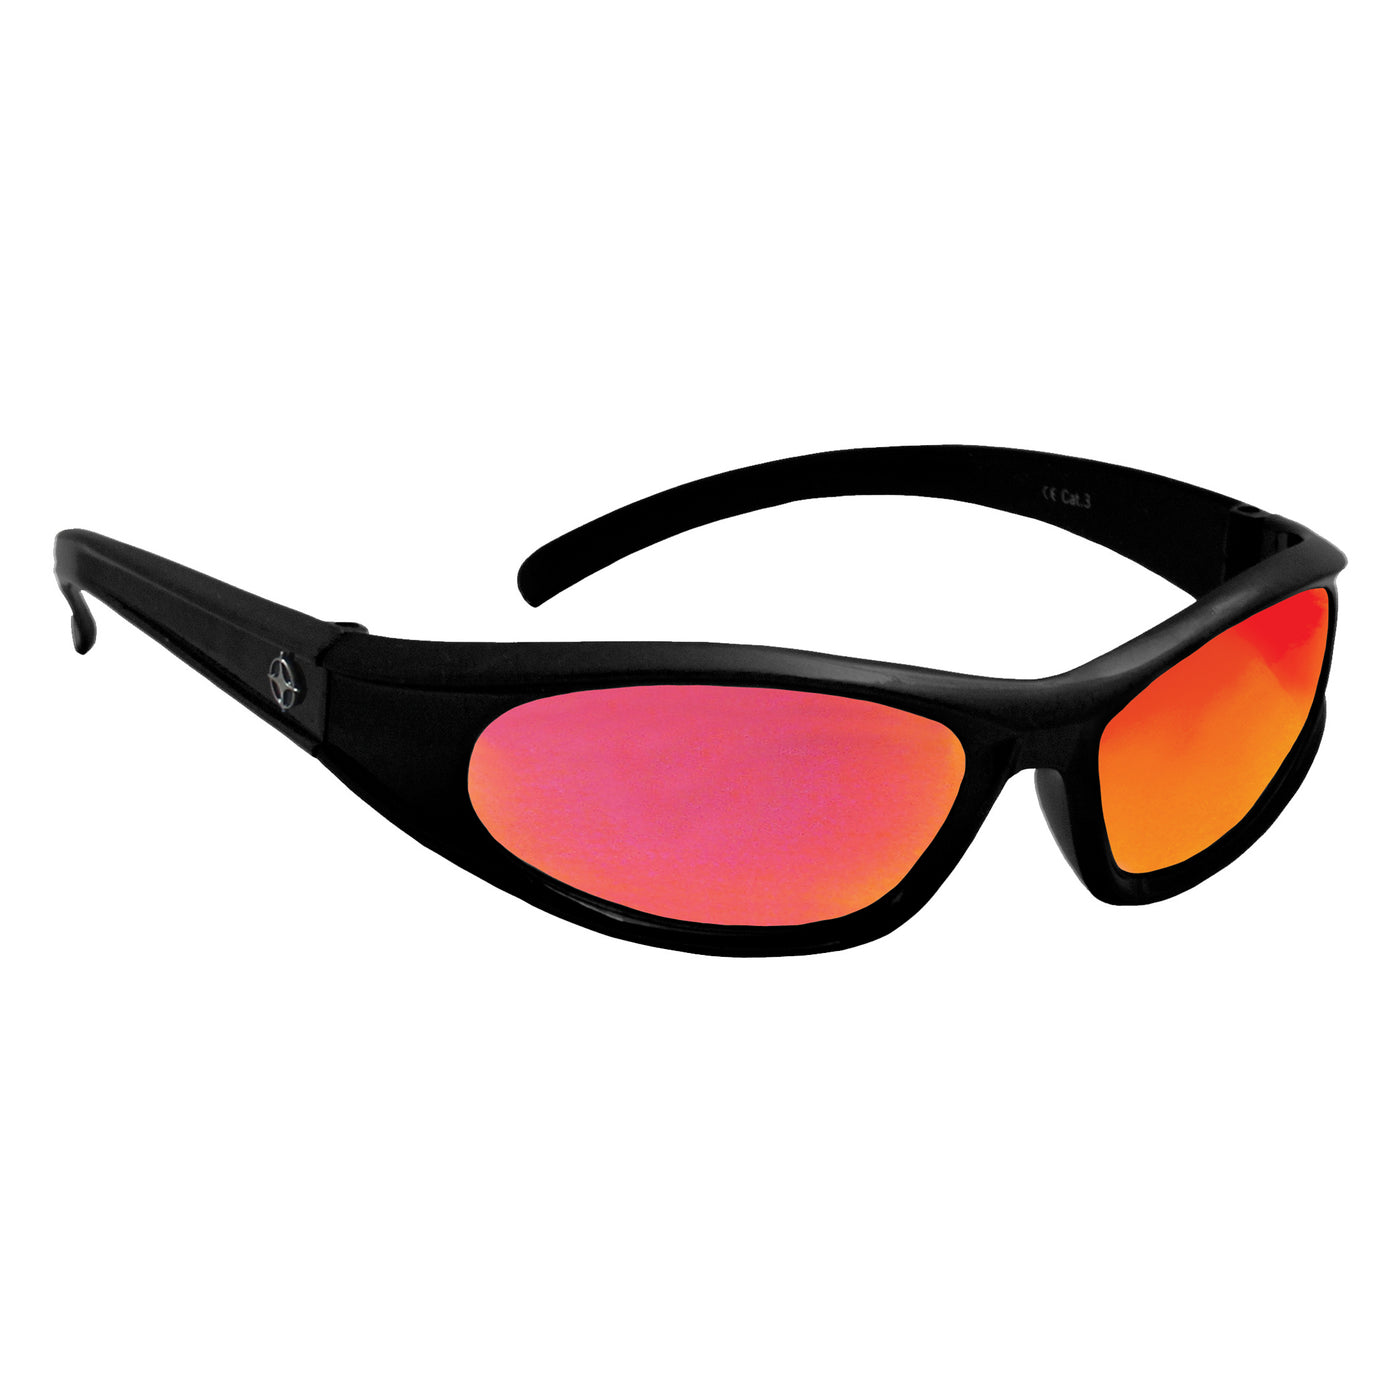 Manbi-PPP Kids Cosmos Sunglass Black/Red - DISCONTINUED